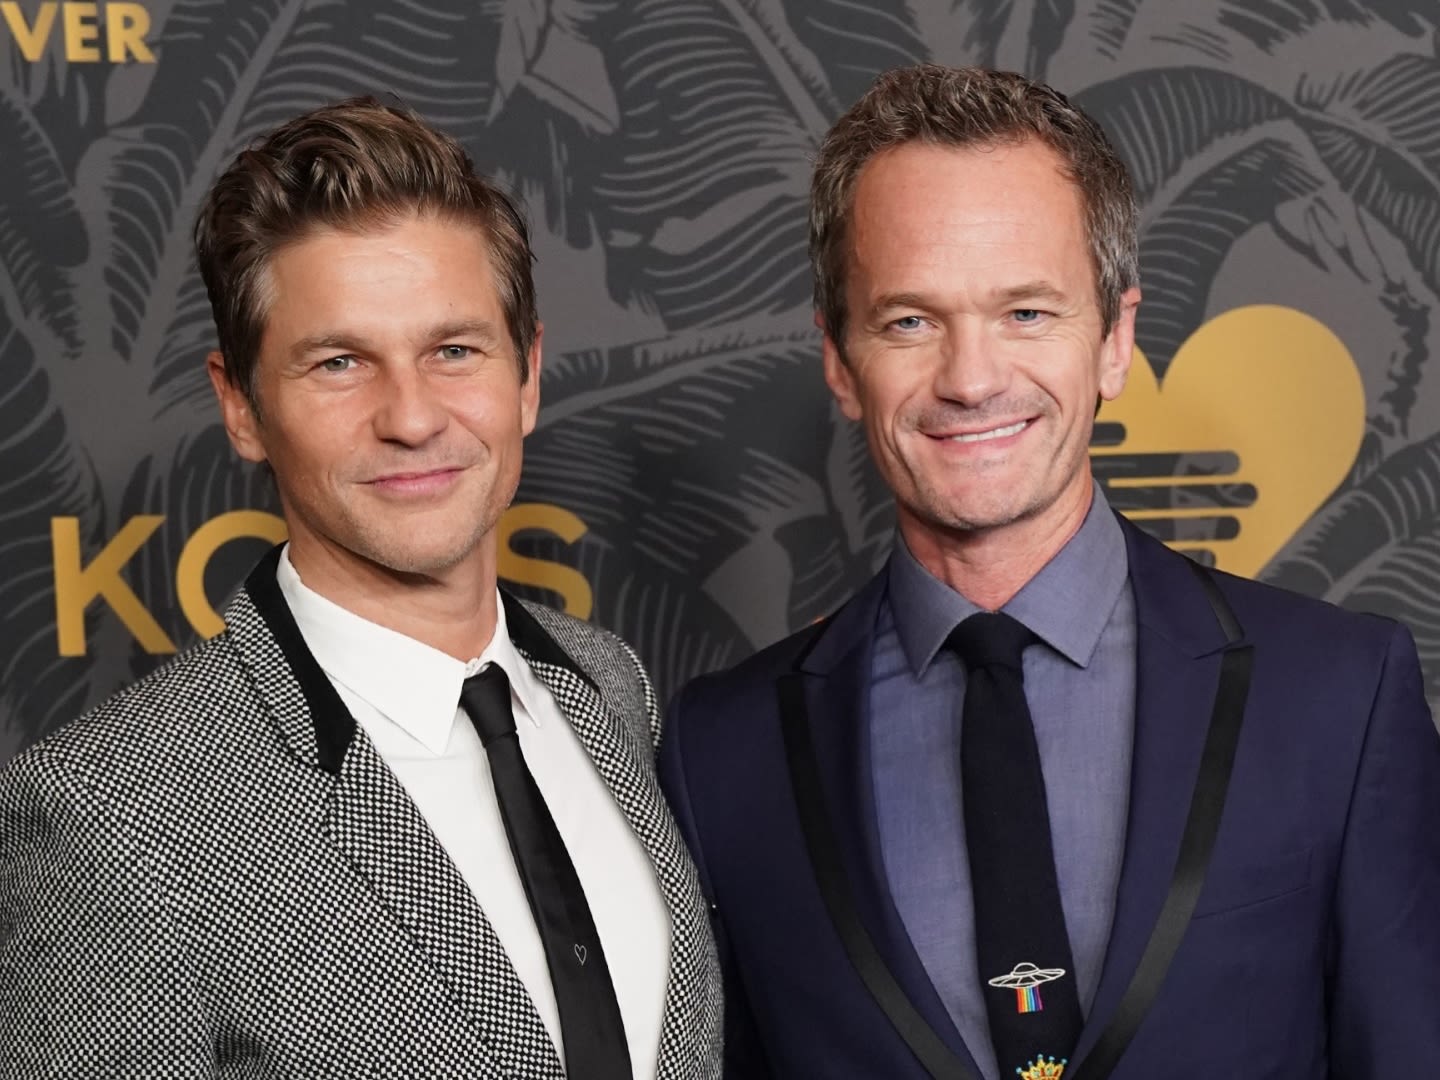 Neil Patrick Harris & David Burtka Revealed They’re Trying to Discourage Their Twins From Doing This in Front of the Paparazzi